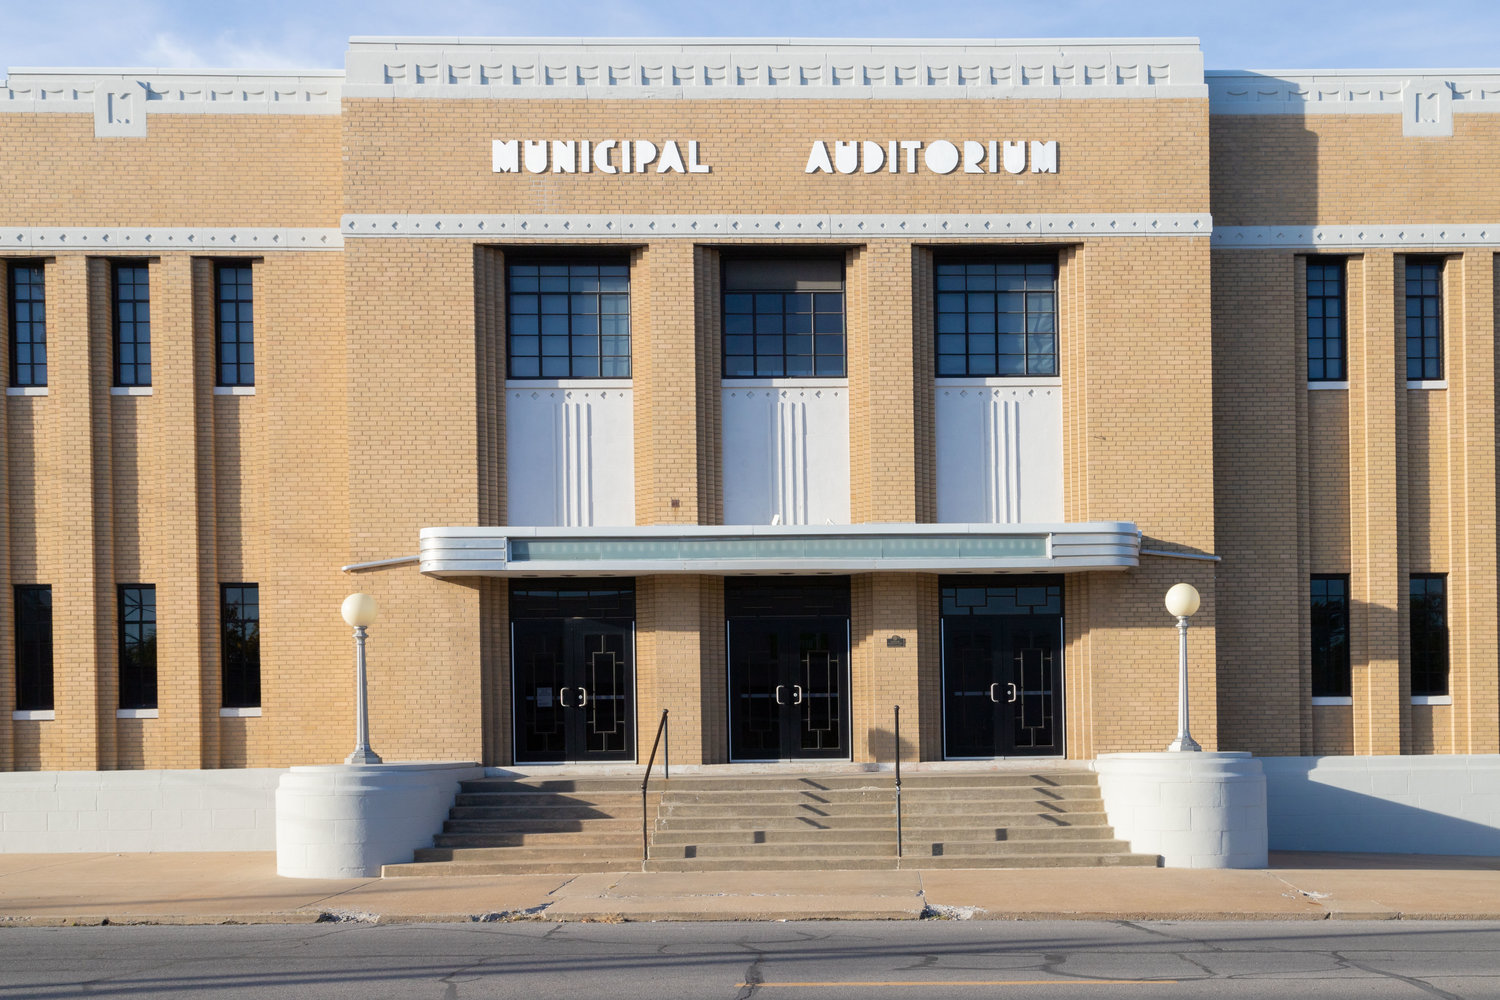 Moberly’s Municipal Auditorium, built in 1939, is an example of the architecture of Moberly’s Ludwig Apt.